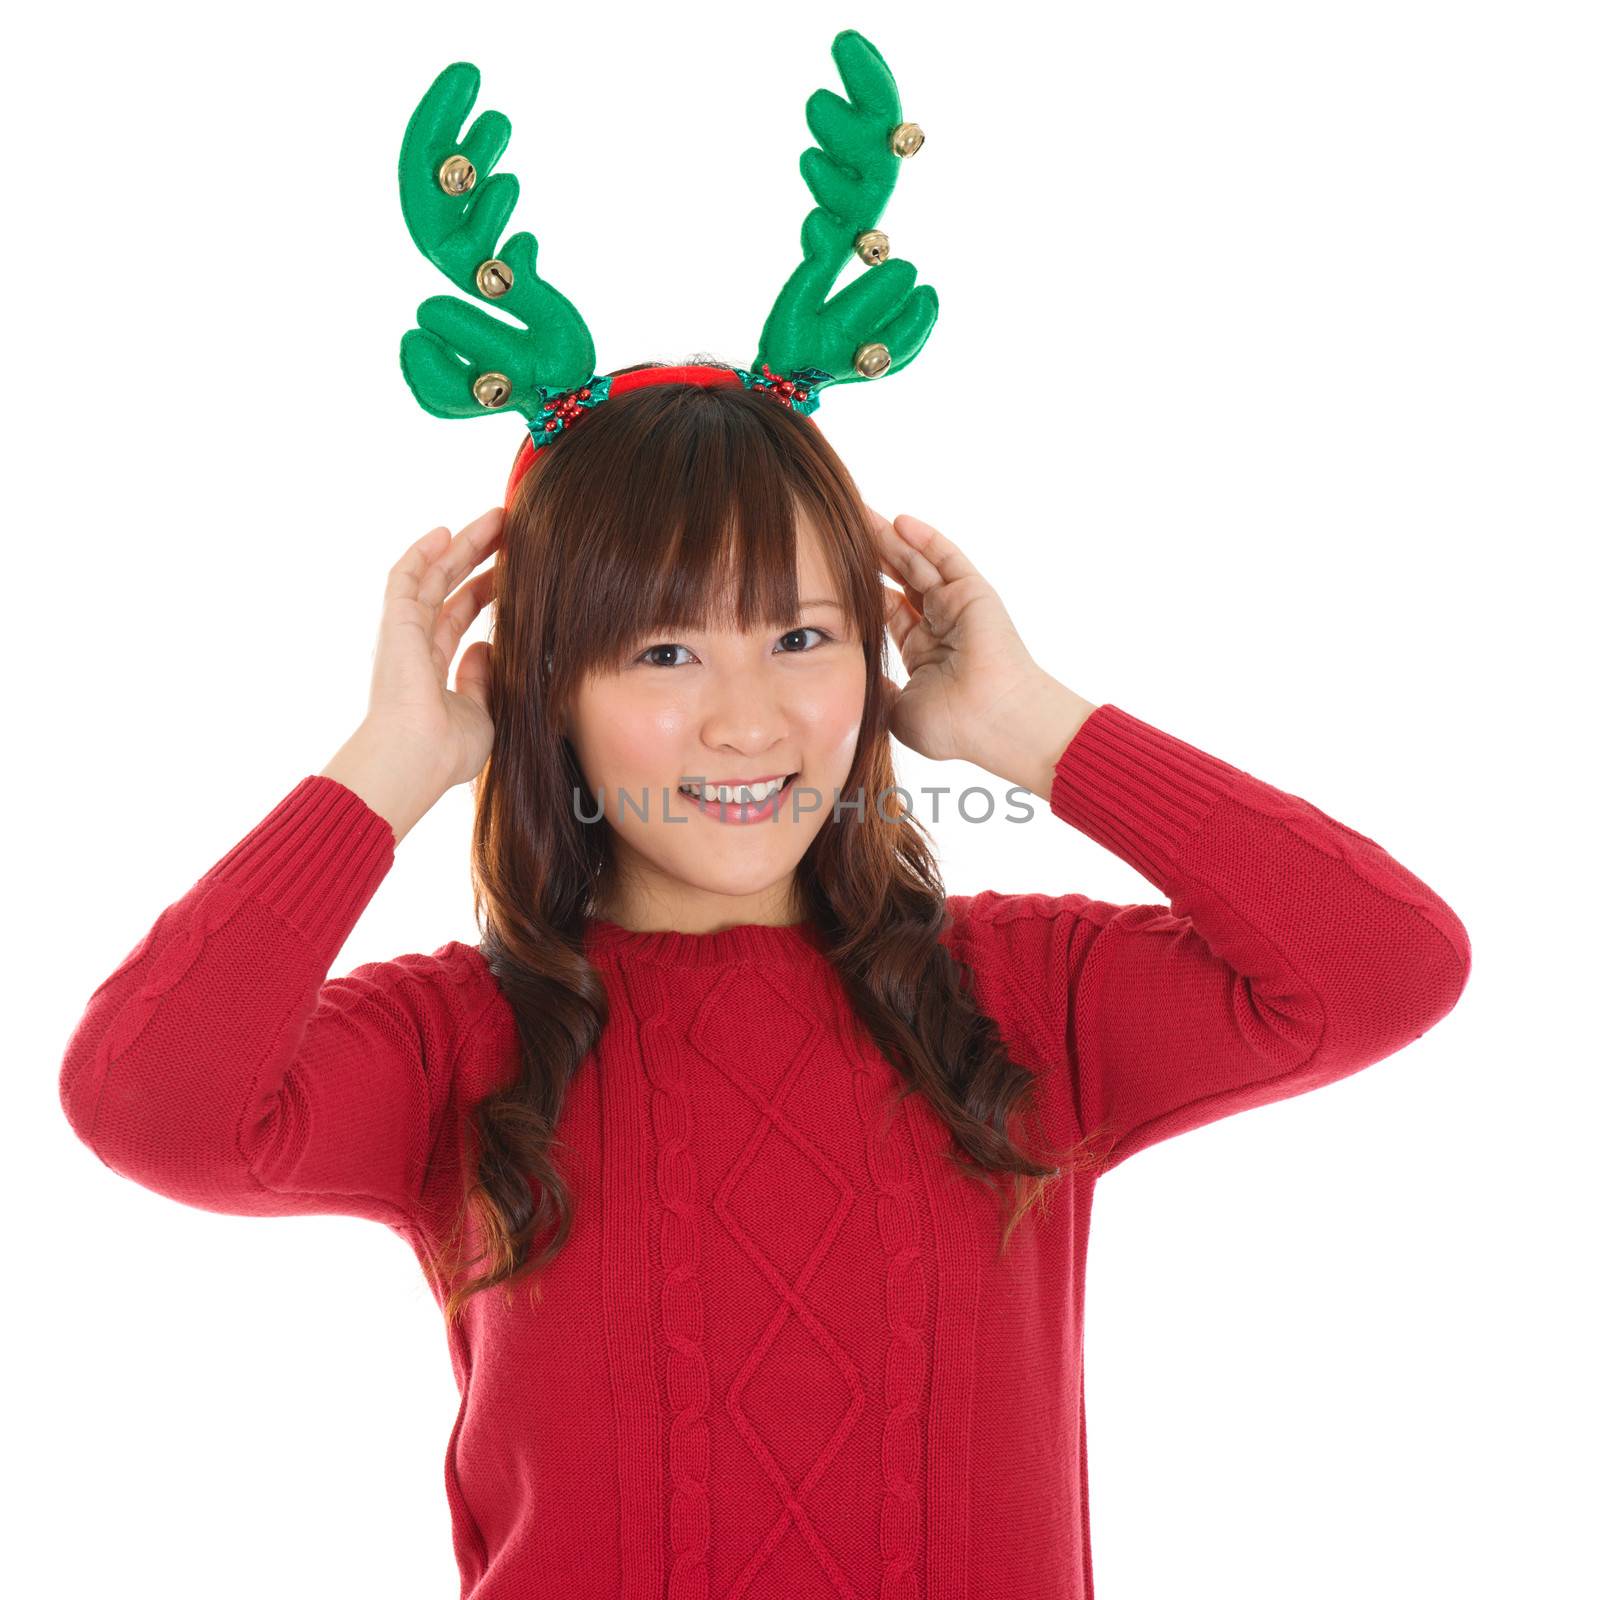 Asian Christmas woman wearing reindeer horns. Christmas woman portrait of a cute, beautiful smiling Asian Chinese / Japanese model. Isolated on white background.